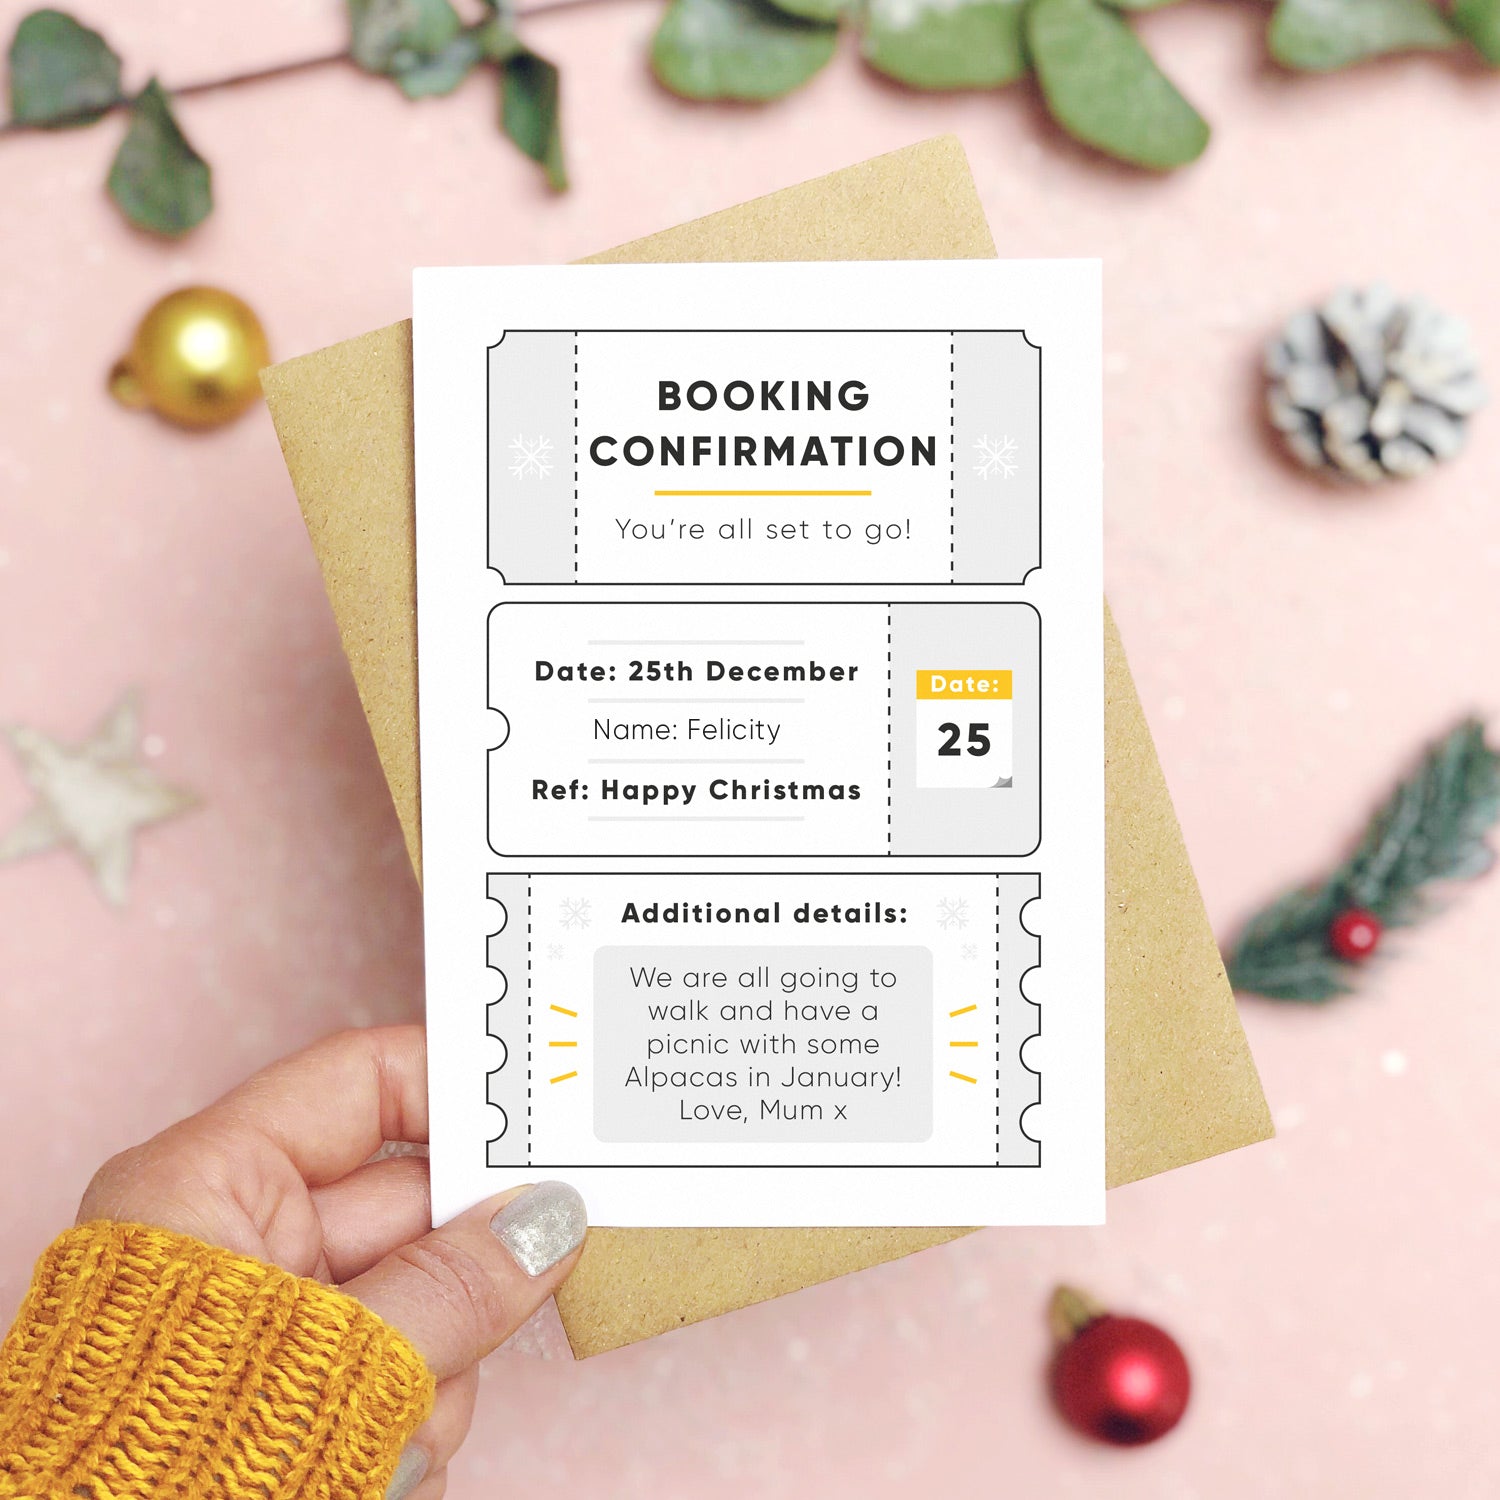 A personalised christmas booking confirmation gift card held in front of a pink background scattered with foliage, baubles, and a pine cone. Pictured is the grey version of the card on top of a kraft brown envelope.